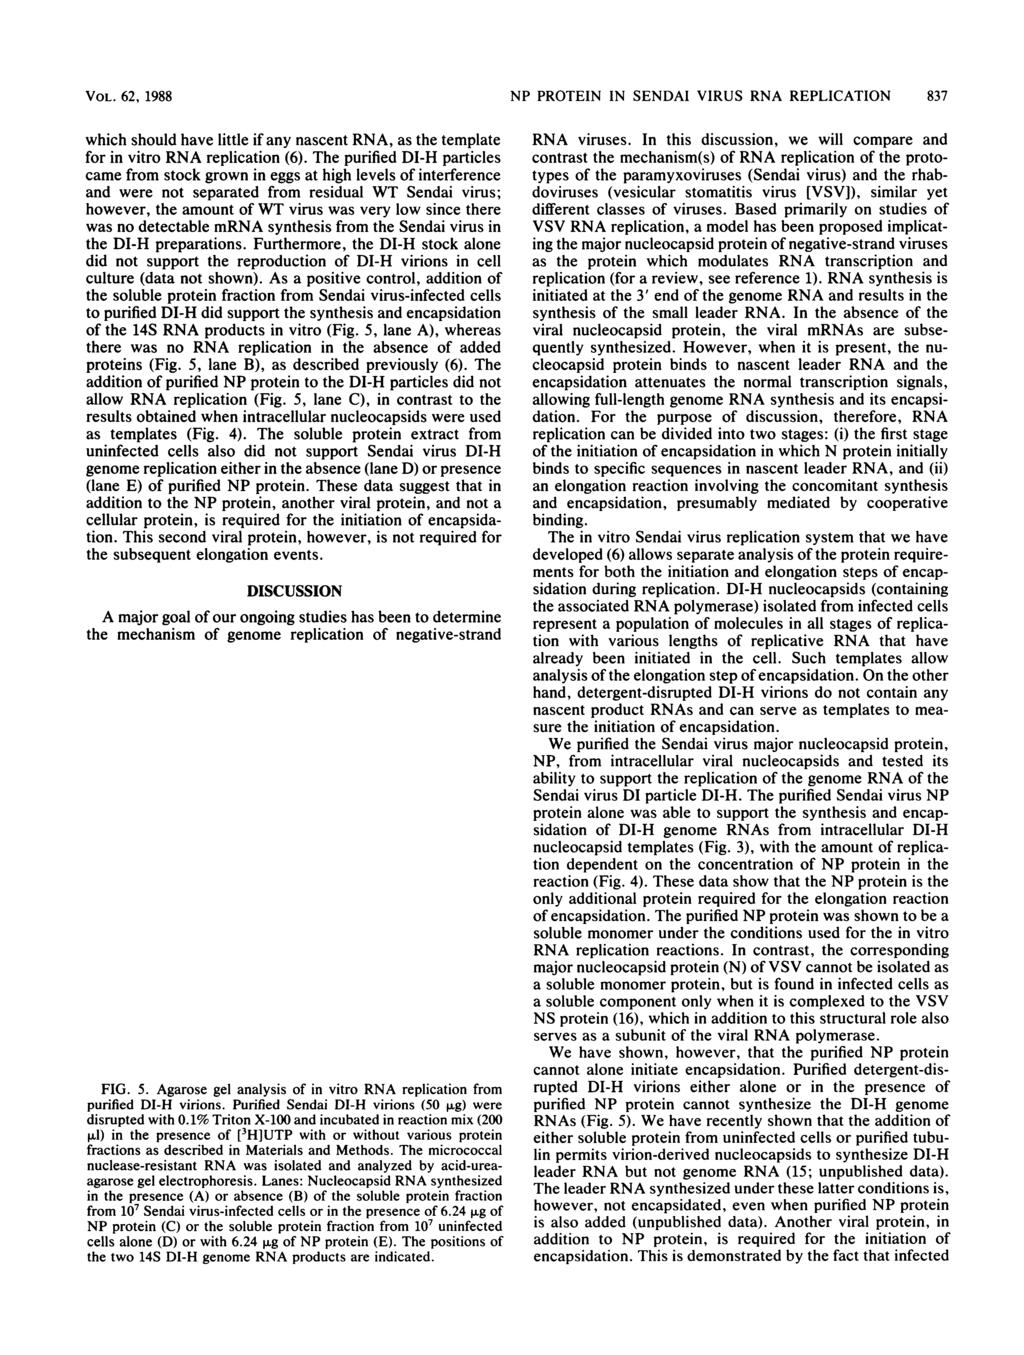 VOL. 62, 1988 which should have little if any nascent RNA, as the template for in vitro RNA replication (6).